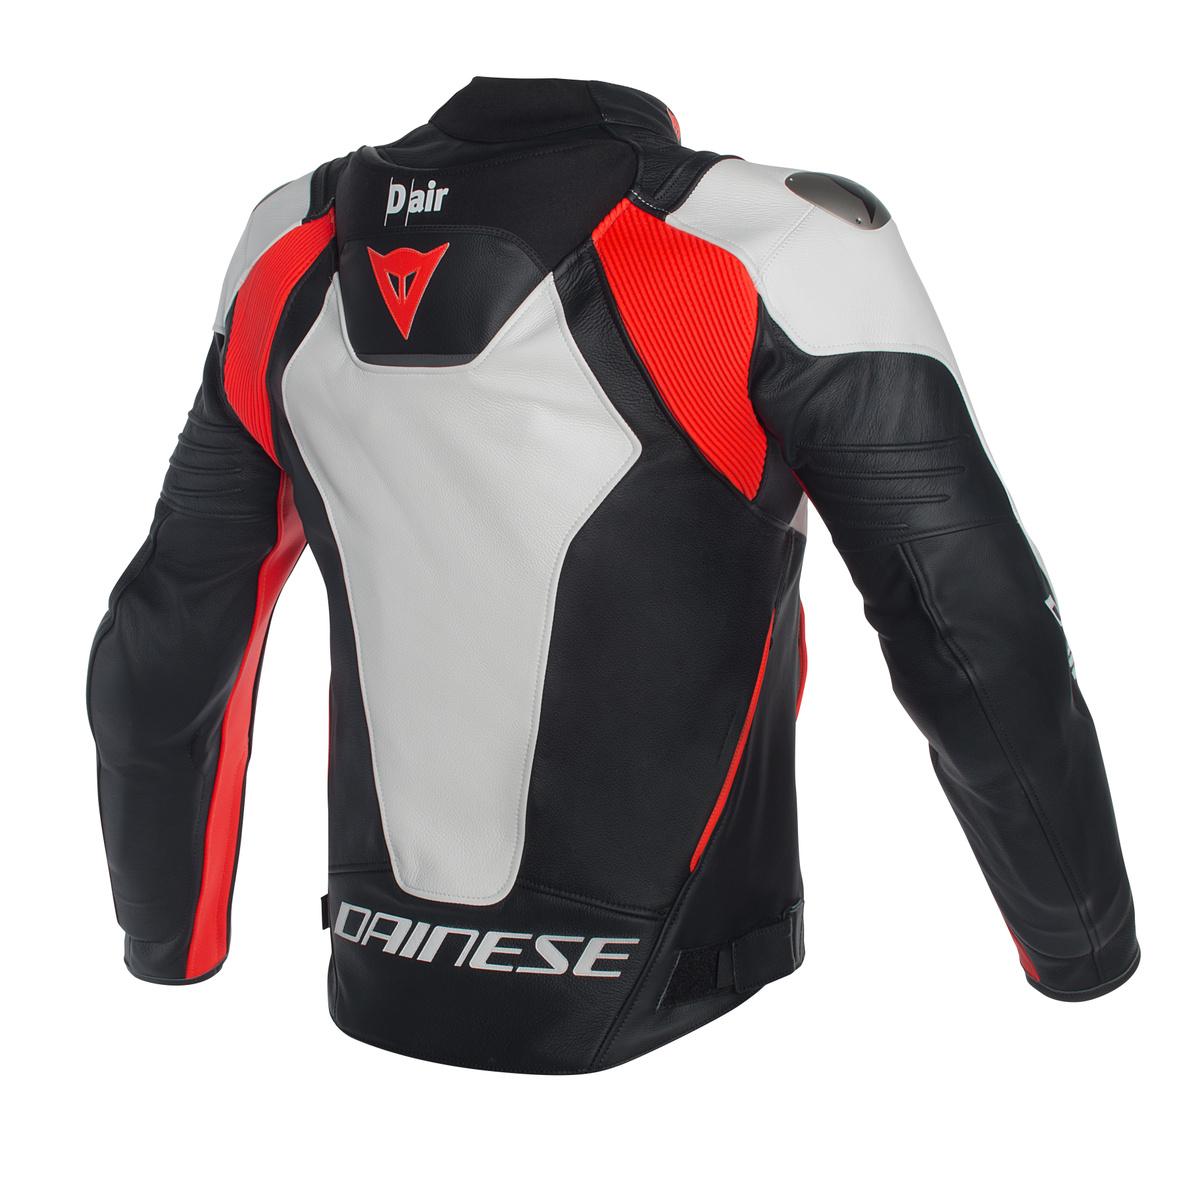 DAINESE MISANO D-AIR JACKET WHITE/BLACK/RED FLUO - P&H Motorcycles